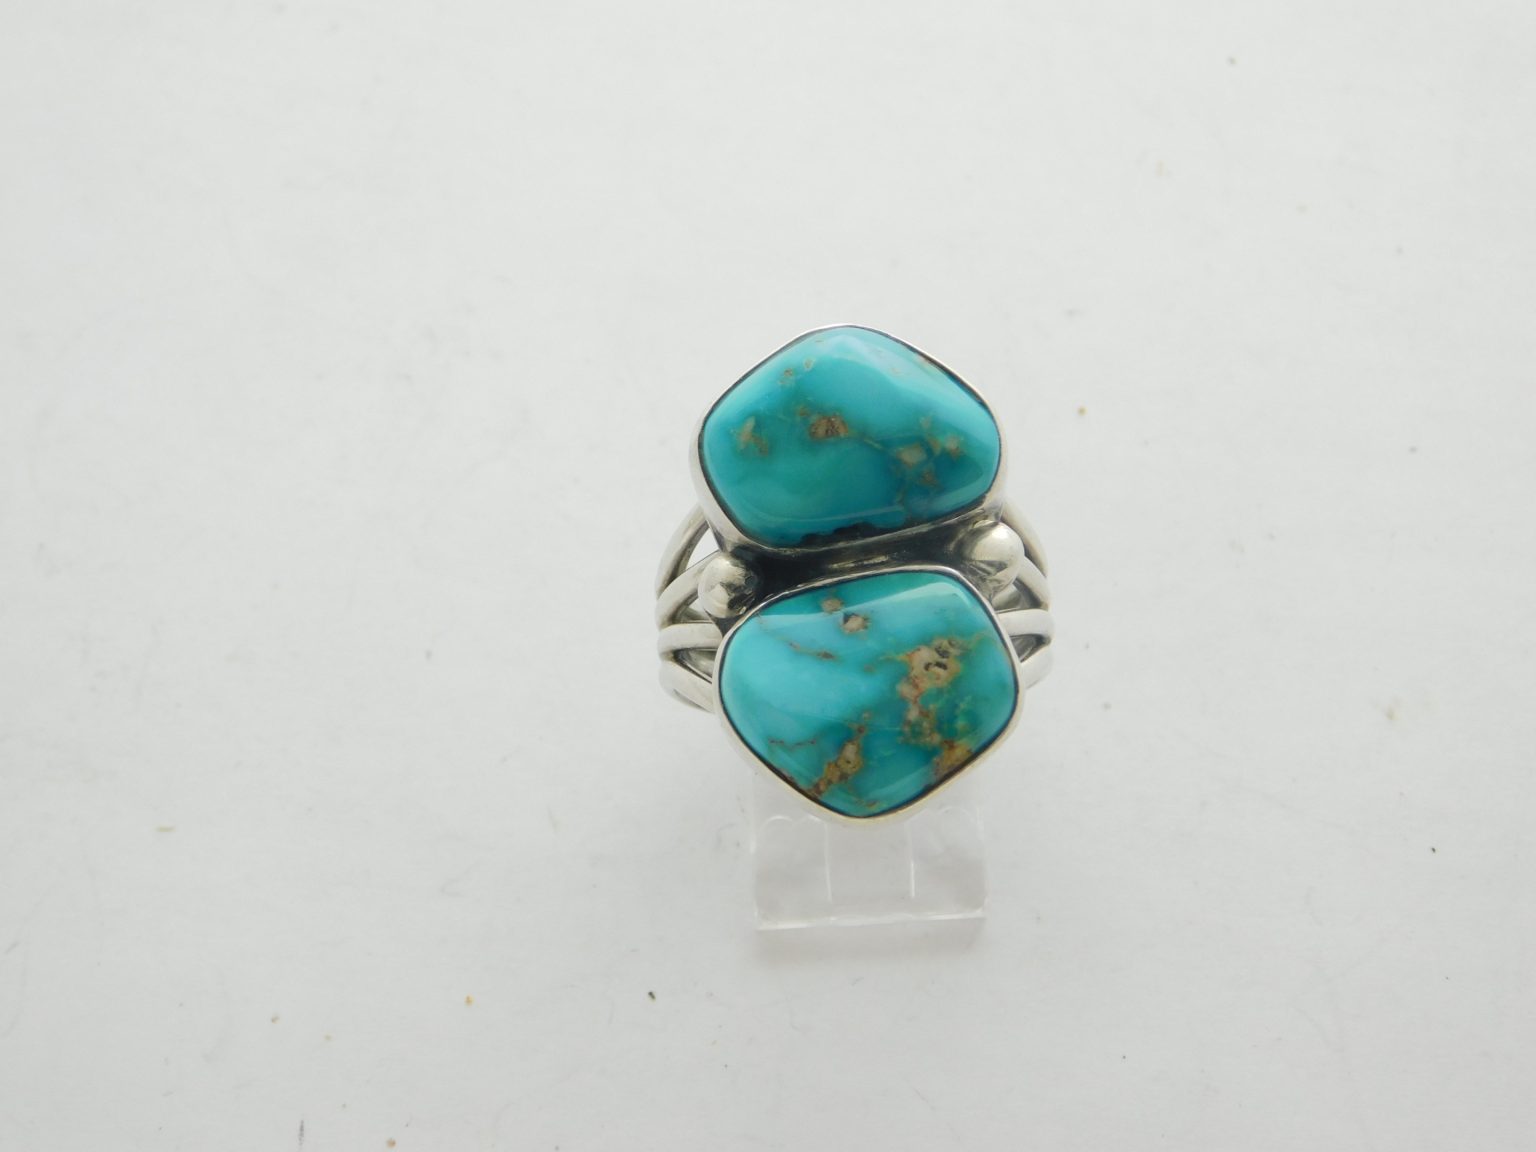 Orville Tsinnie Navajo Blue Gem Turquoise and Sterling Silver Ring